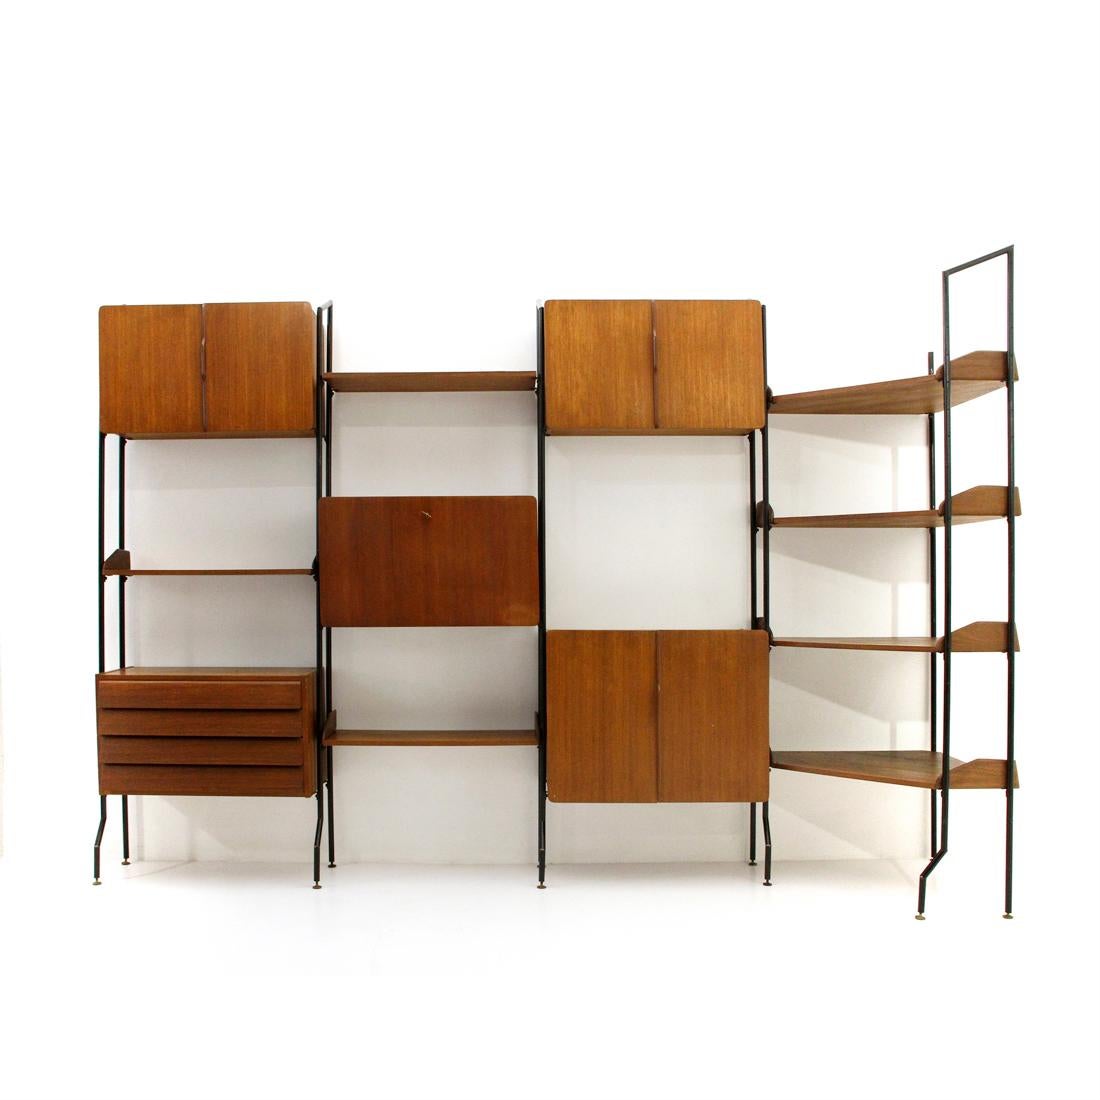 Italian manufacture bookcase produced in the 1950s.
Uprights in black painted metal with height-adjustable brass feet.
Storage compartments and shelves in teak veneered wood.
Door handles in shaped wood.
Drawers with recessed handle.
Container